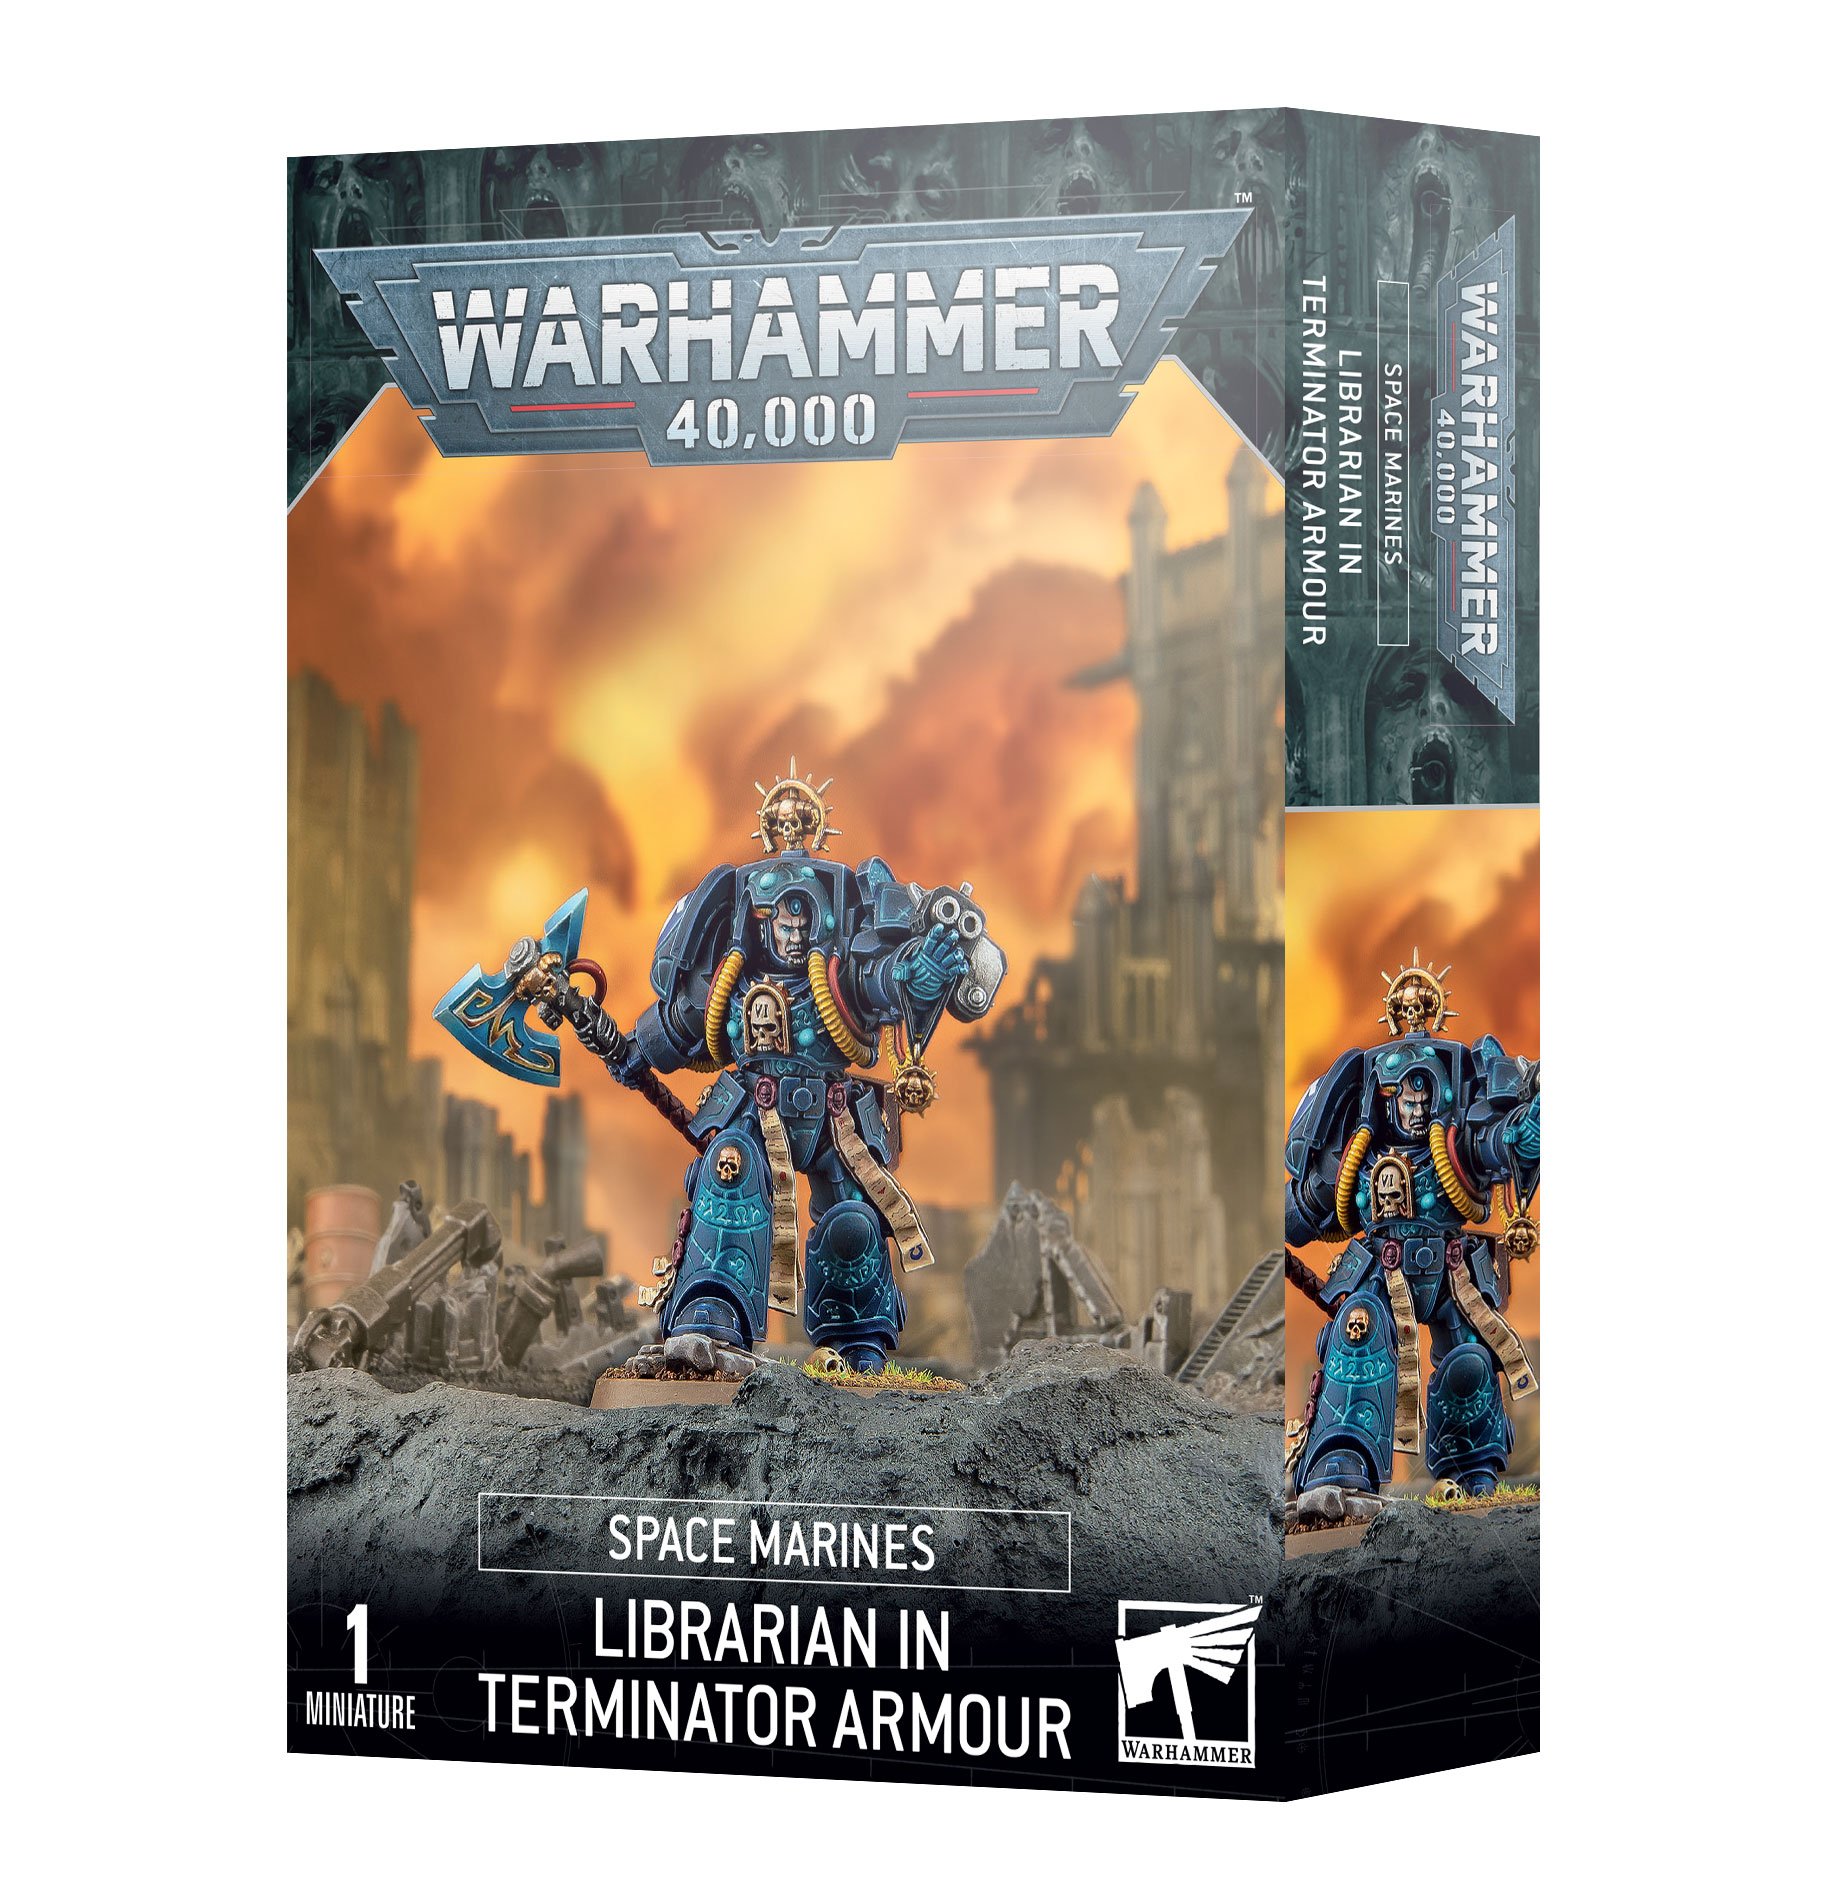 Warhammer 40,000: Space Marines: Librarian in Terminator Armour 